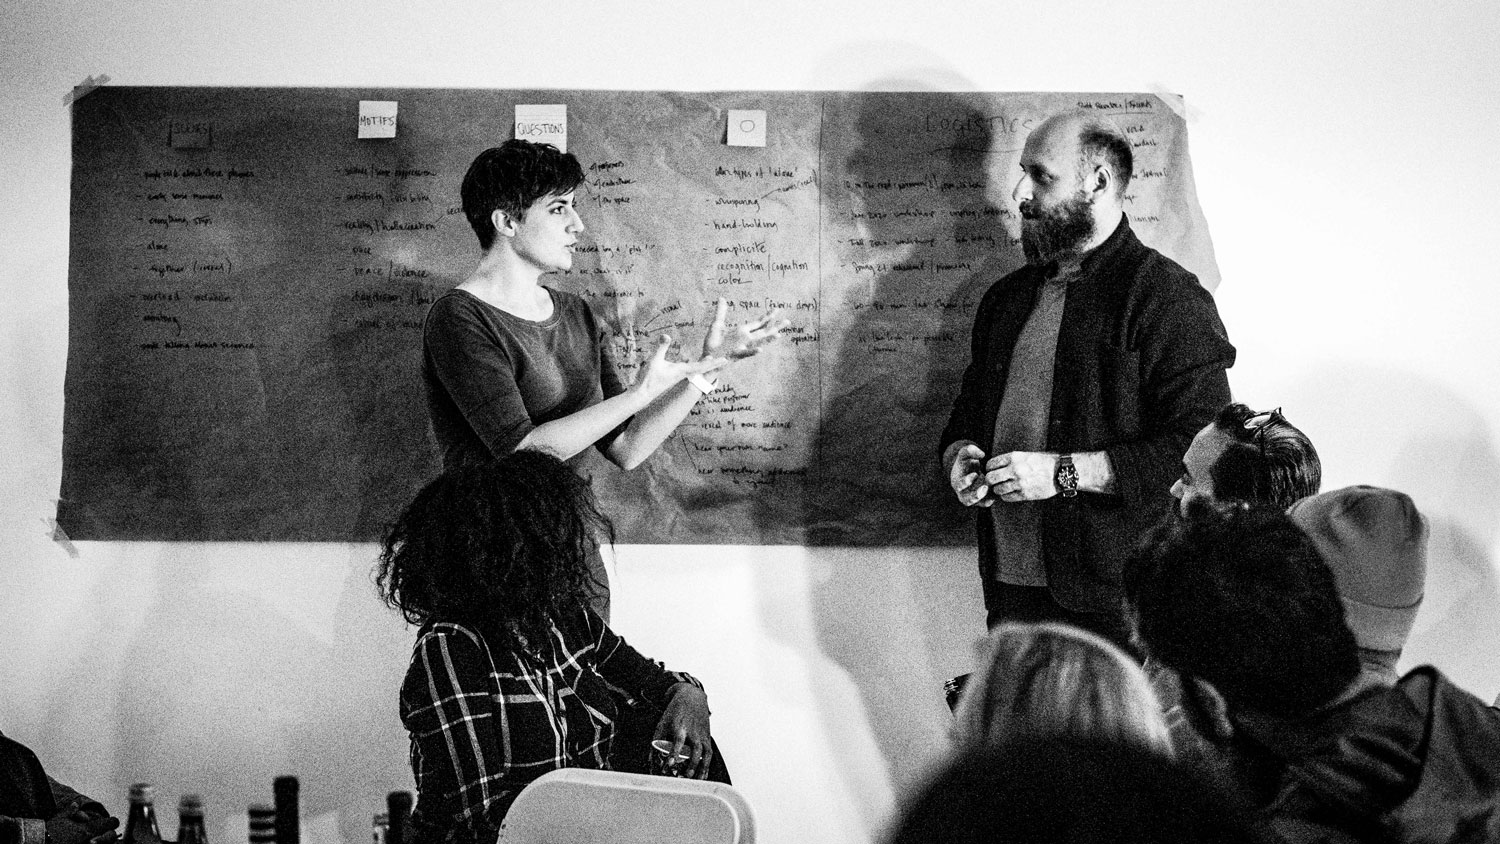 Annie Saunders talking to a bearded man in front of a blackboard in front of a small crowd. 